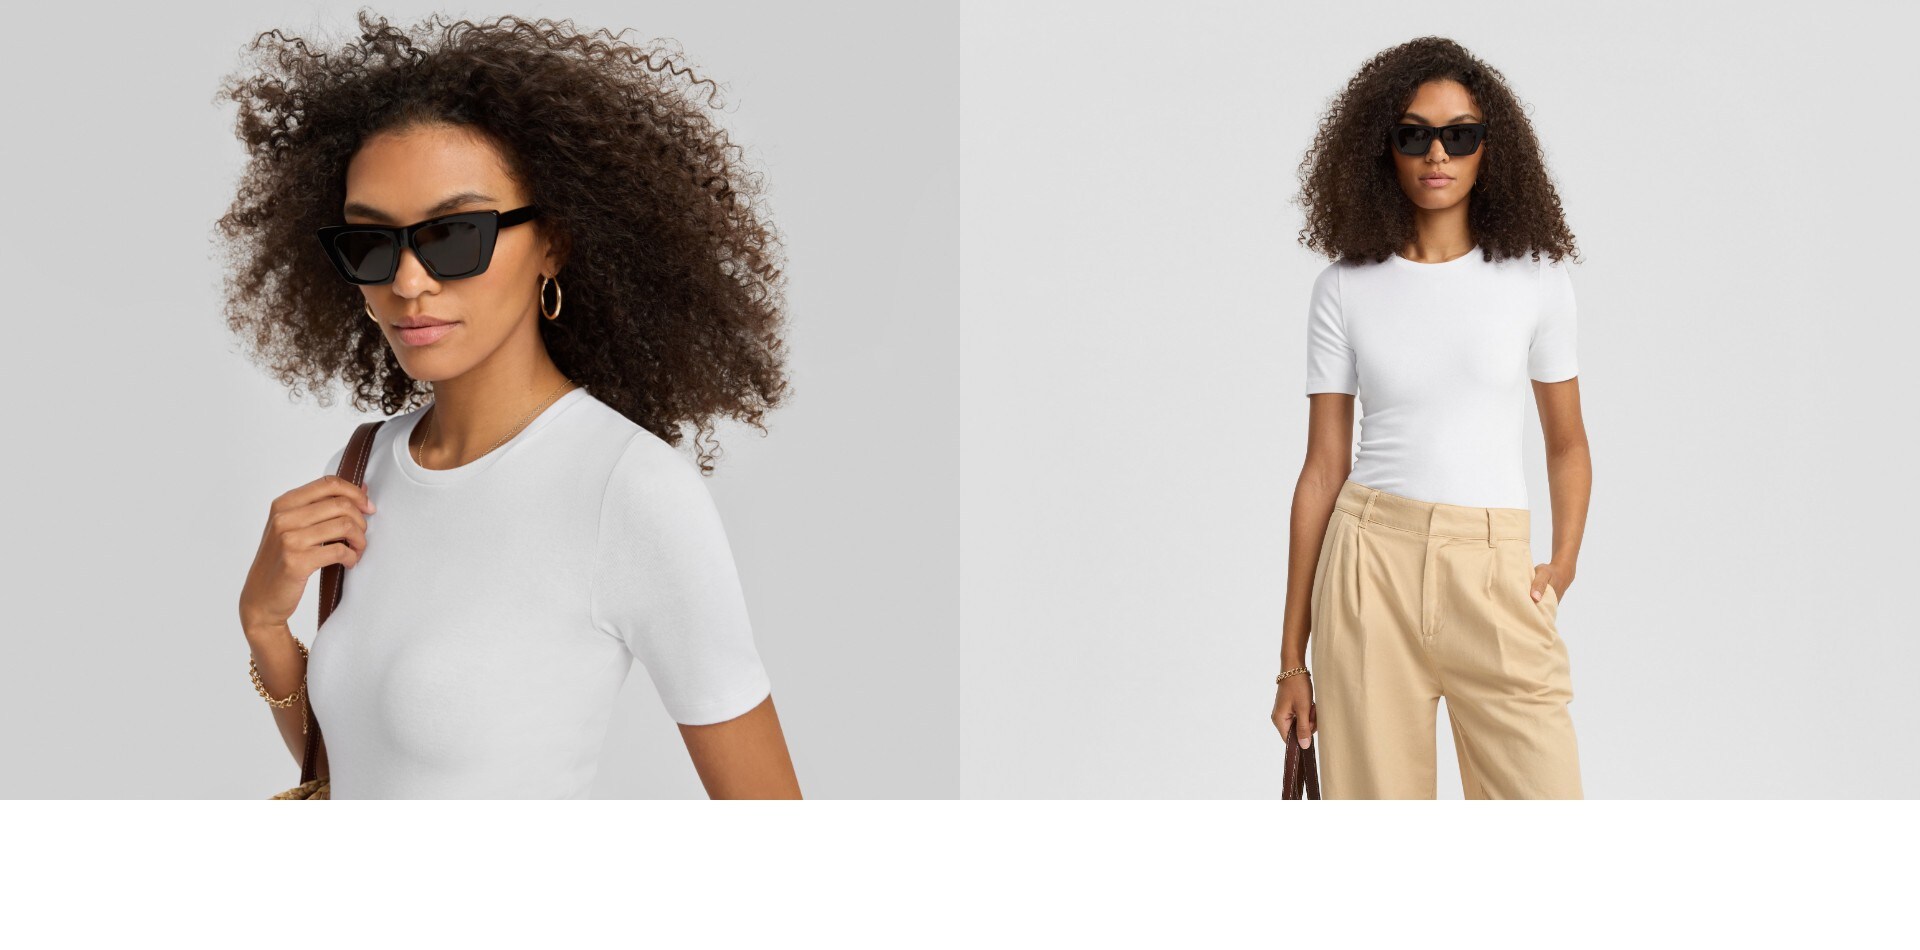 gap.com - Women's Tshirts and Tank Tops Collection